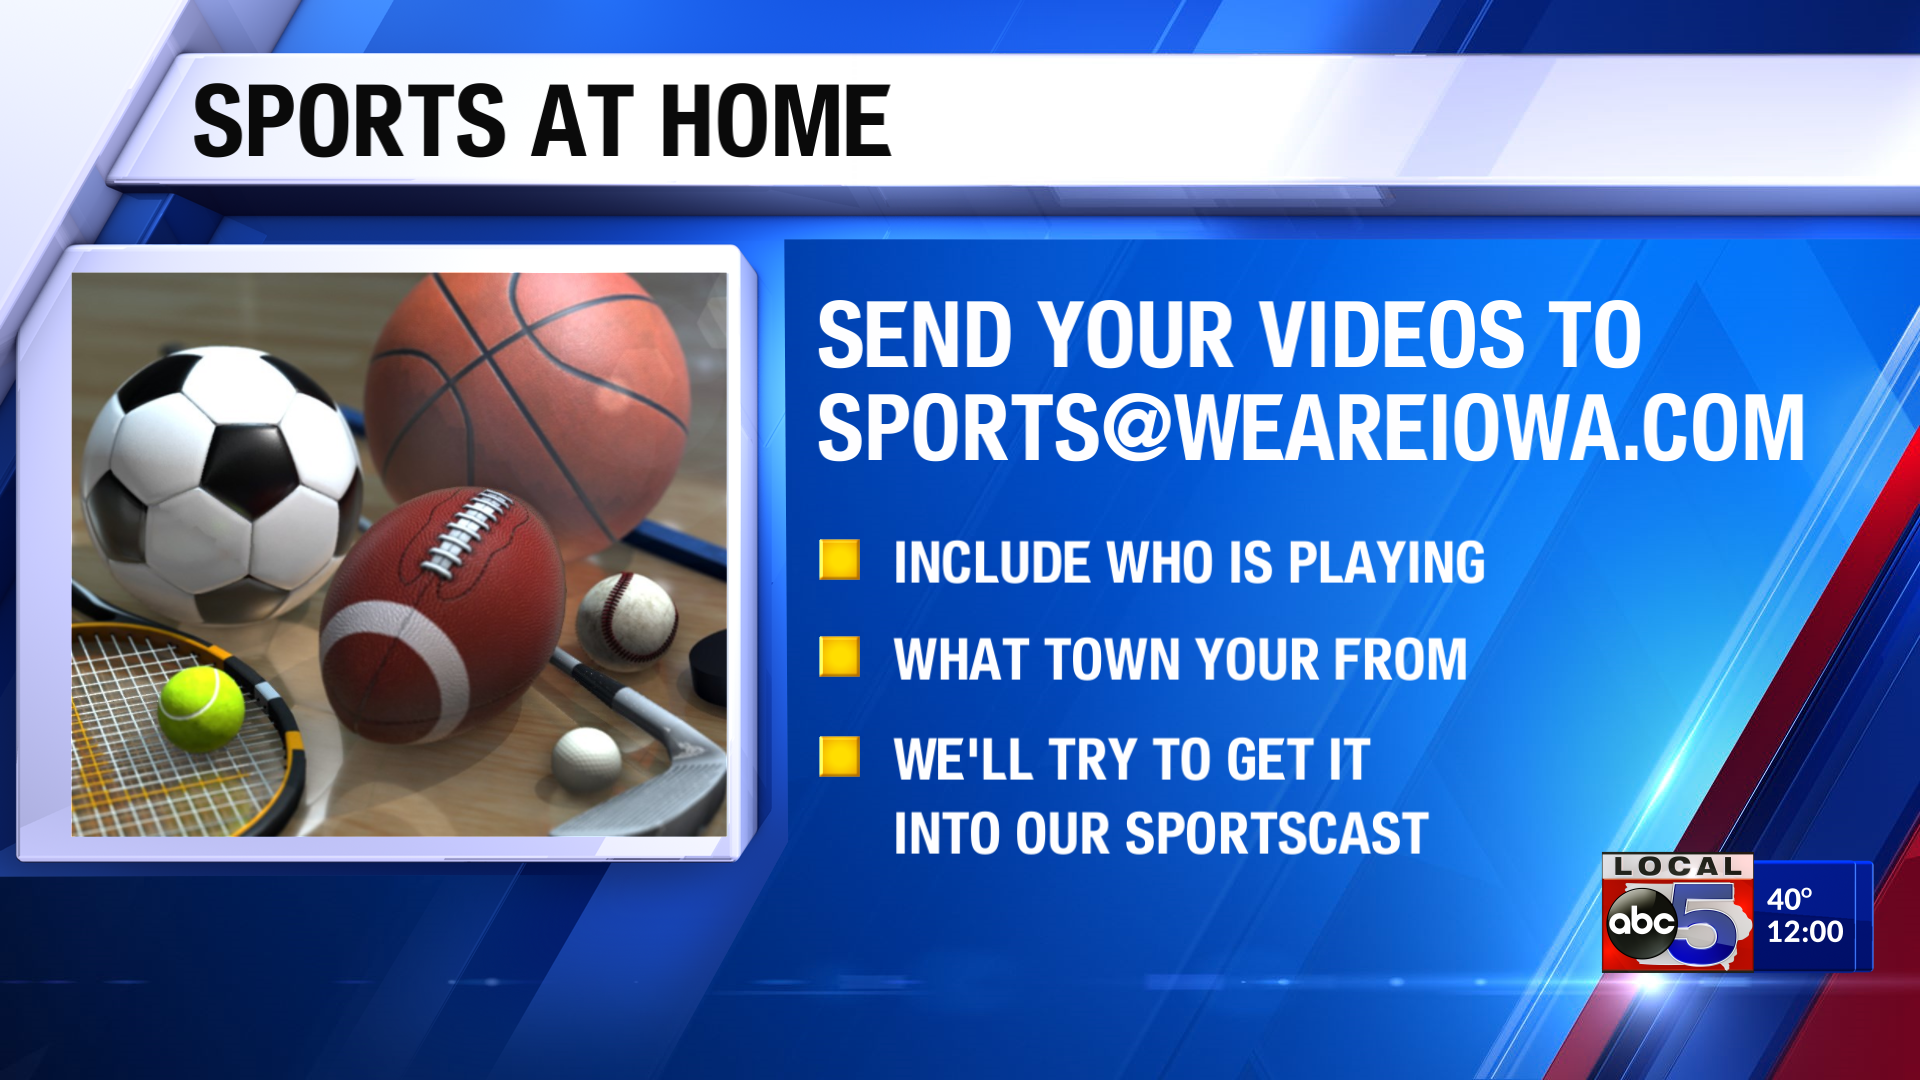 Playing some sports while practicing Social Distancing? Send video to Sports@weareiowa.com and we will highlight it in sports!